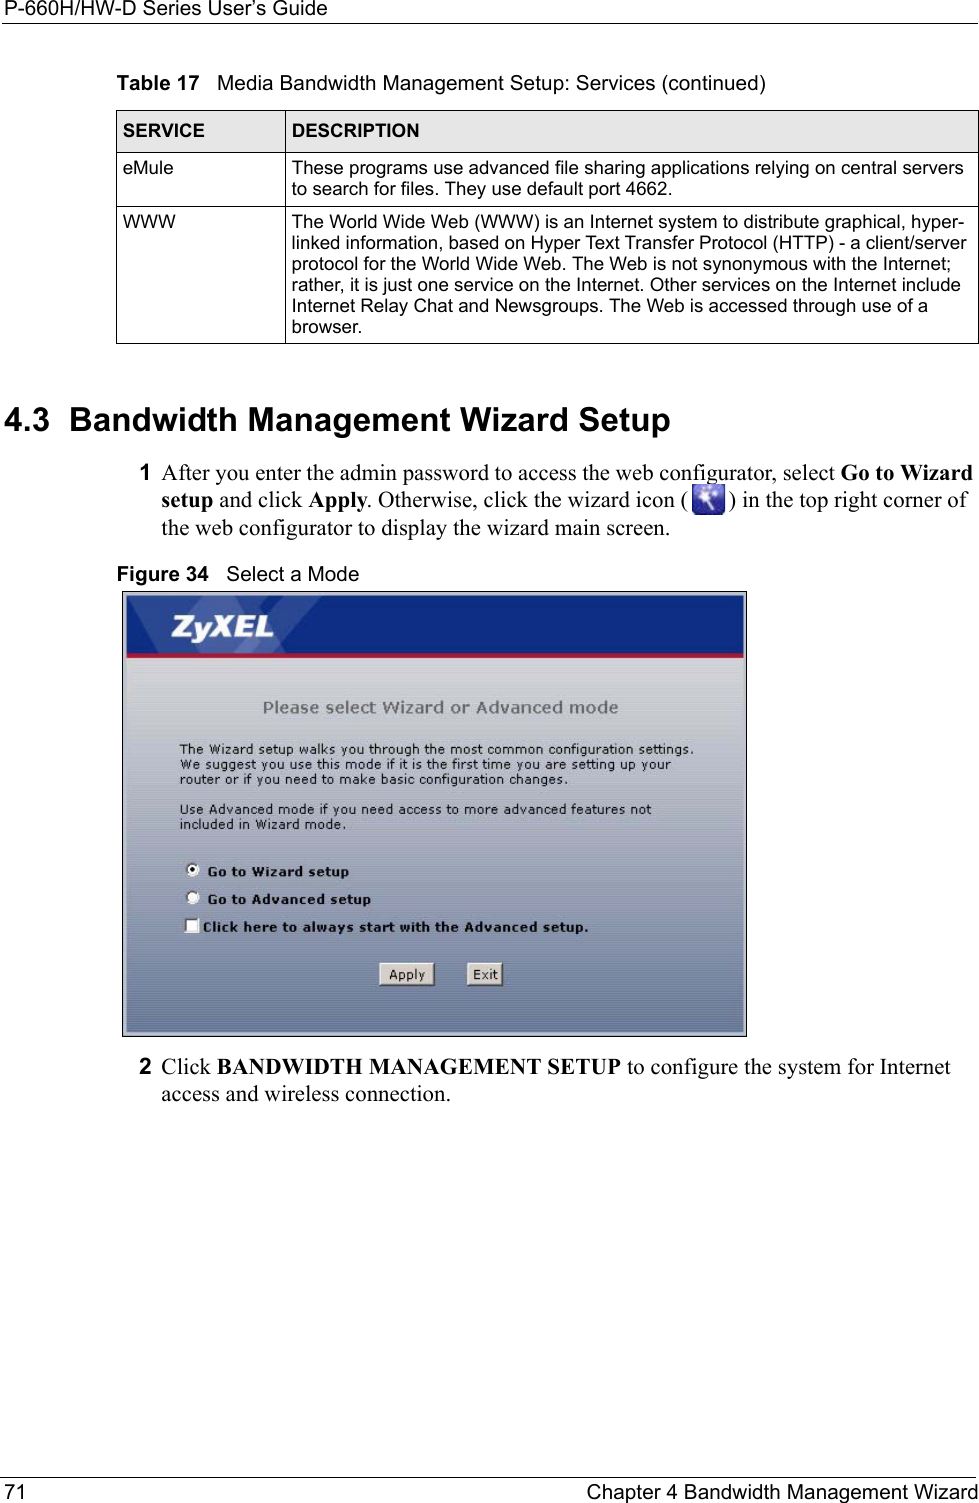 P-660H/HW-D Series User’s Guide71 Chapter 4 Bandwidth Management Wizard4.3  Bandwidth Management Wizard Setup1After you enter the admin password to access the web configurator, select Go to Wizard setup and click Apply. Otherwise, click the wizard icon ( ) in the top right corner of the web configurator to display the wizard main screen. Figure 34   Select a Mode2Click BANDWIDTH MANAGEMENT SETUP to configure the system for Internet access and wireless connection.eMule These programs use advanced file sharing applications relying on central servers to search for files. They use default port 4662.WWW The World Wide Web (WWW) is an Internet system to distribute graphical, hyper-linked information, based on Hyper Text Transfer Protocol (HTTP) - a client/server protocol for the World Wide Web. The Web is not synonymous with the Internet; rather, it is just one service on the Internet. Other services on the Internet include Internet Relay Chat and Newsgroups. The Web is accessed through use of a browser.Table 17   Media Bandwidth Management Setup: Services (continued)SERVICE DESCRIPTION